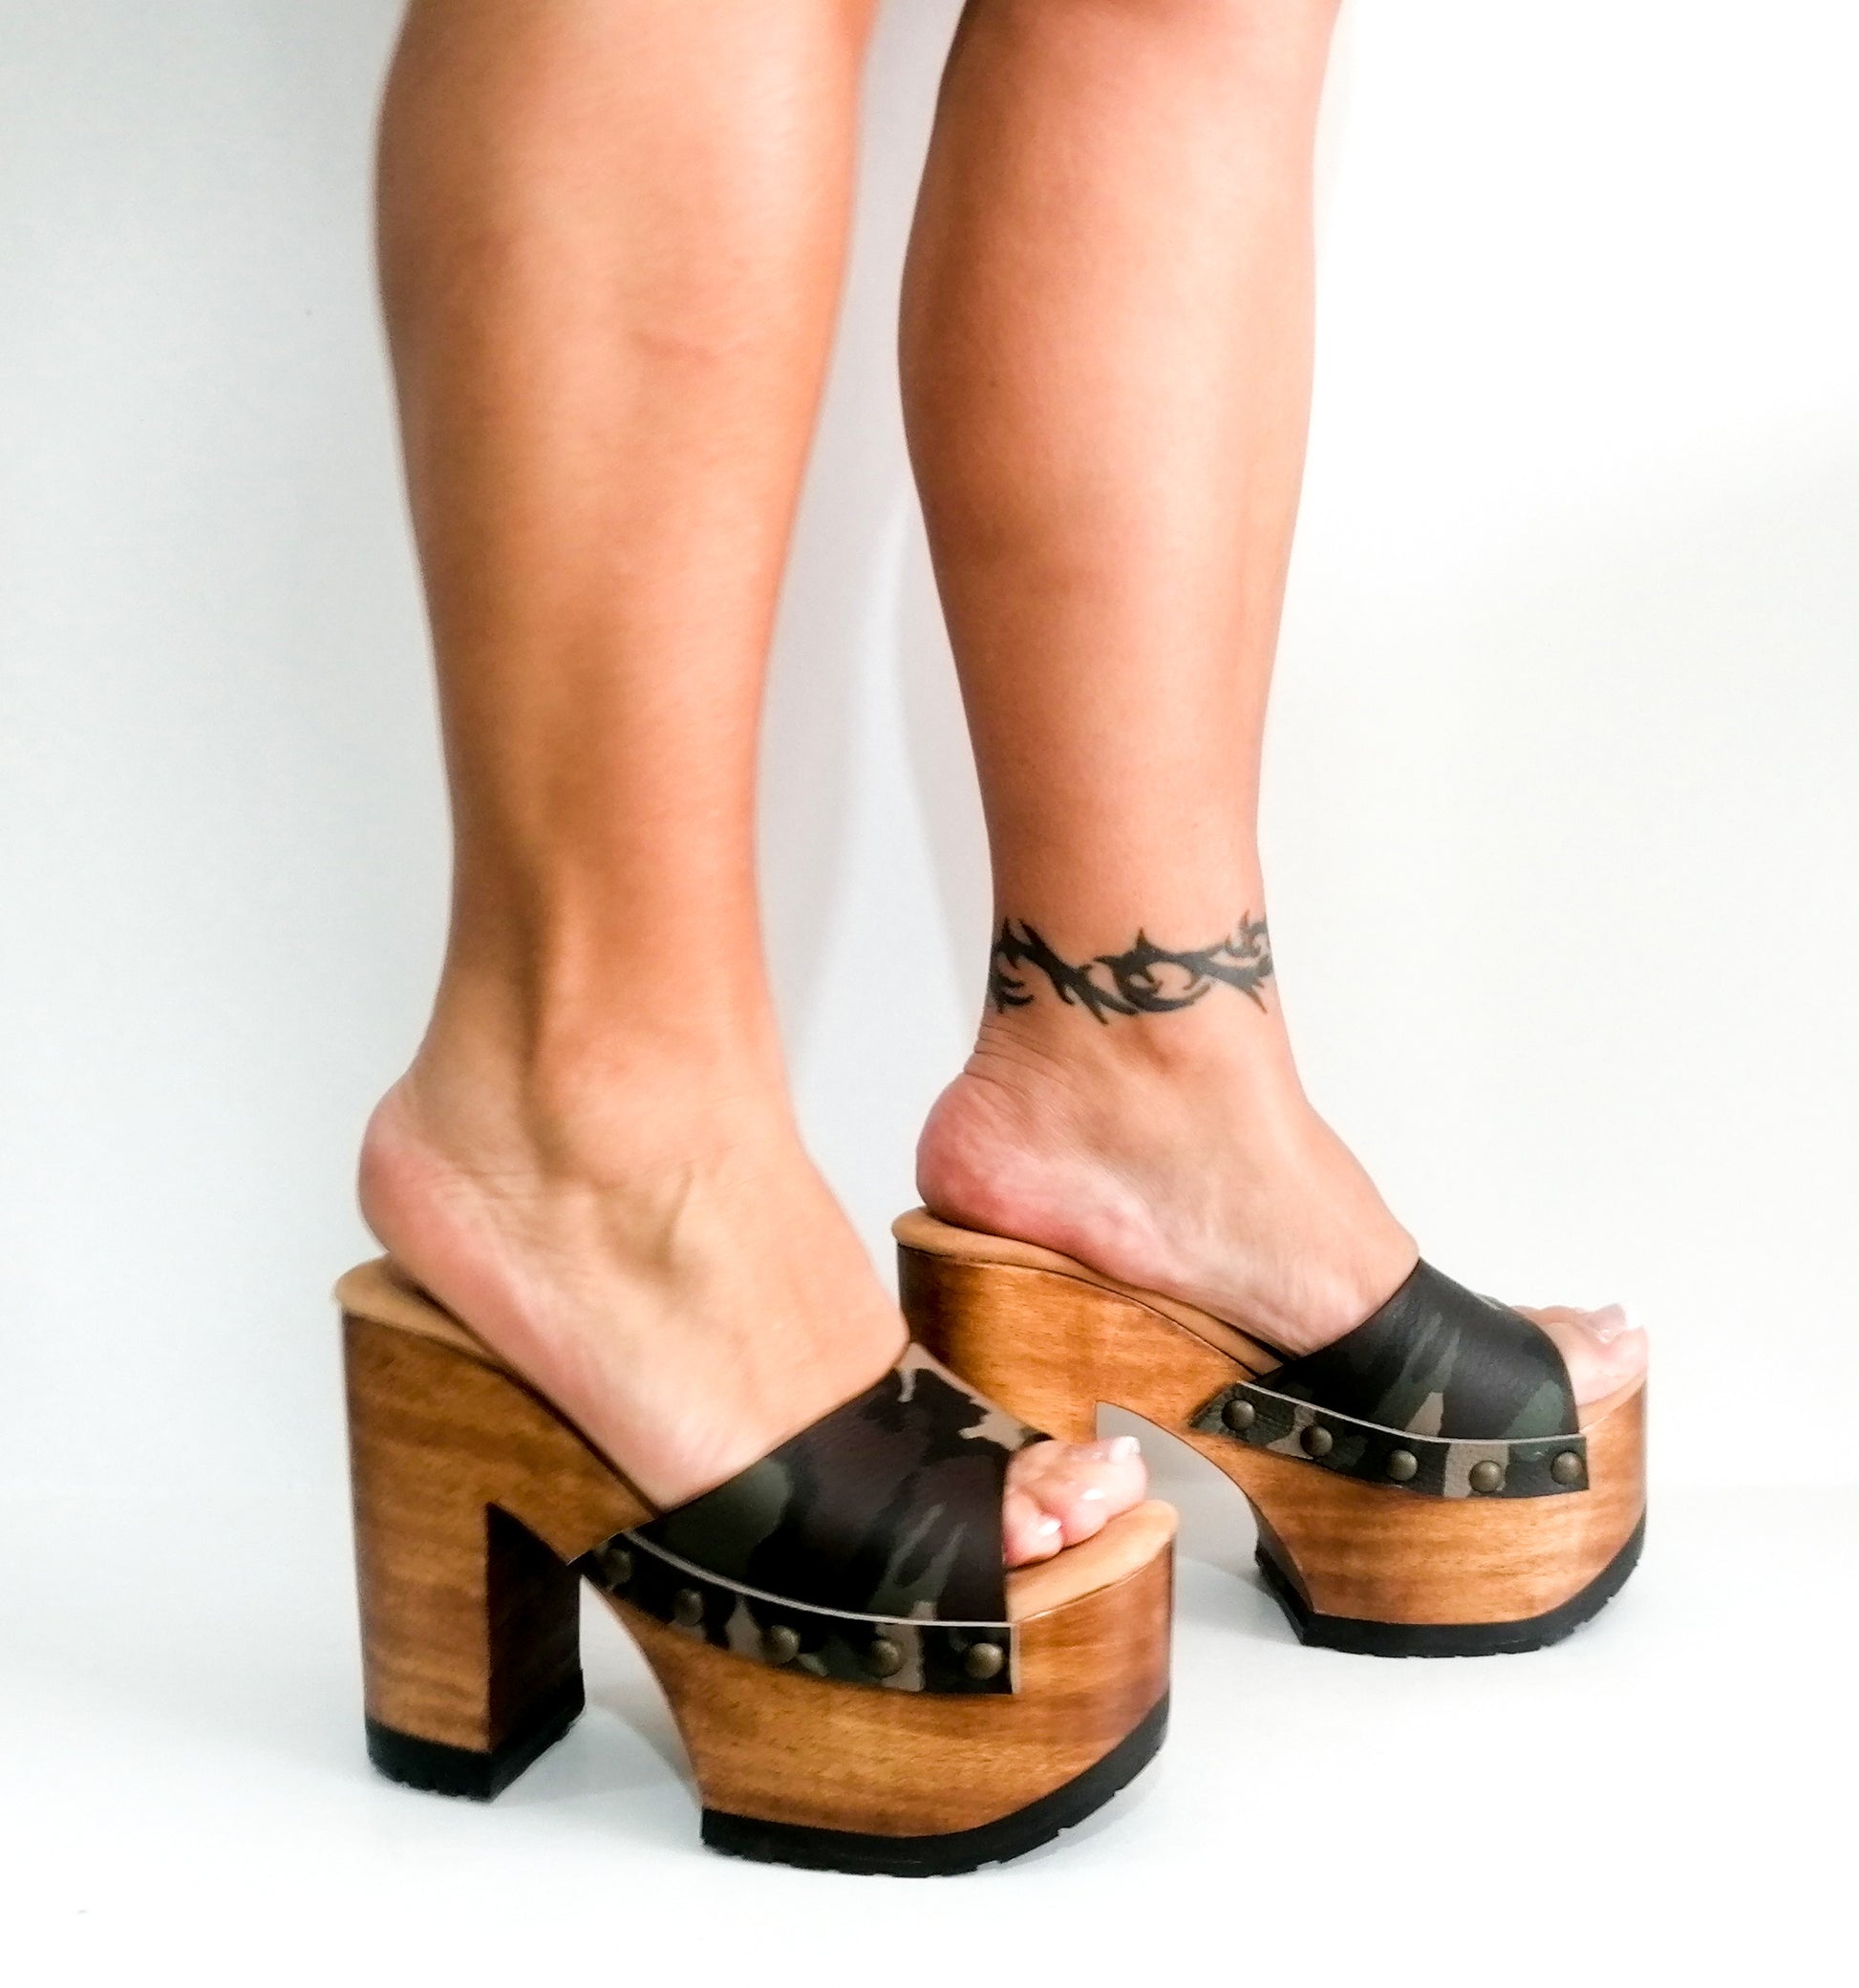 Military leather sandal peep toe style. Platform sandal with super high wooden heel. Clog sandal 70's style. Sizes 34 to 47. High quality handmade leather shoes by sol Caleyo. Sustainable fashion.